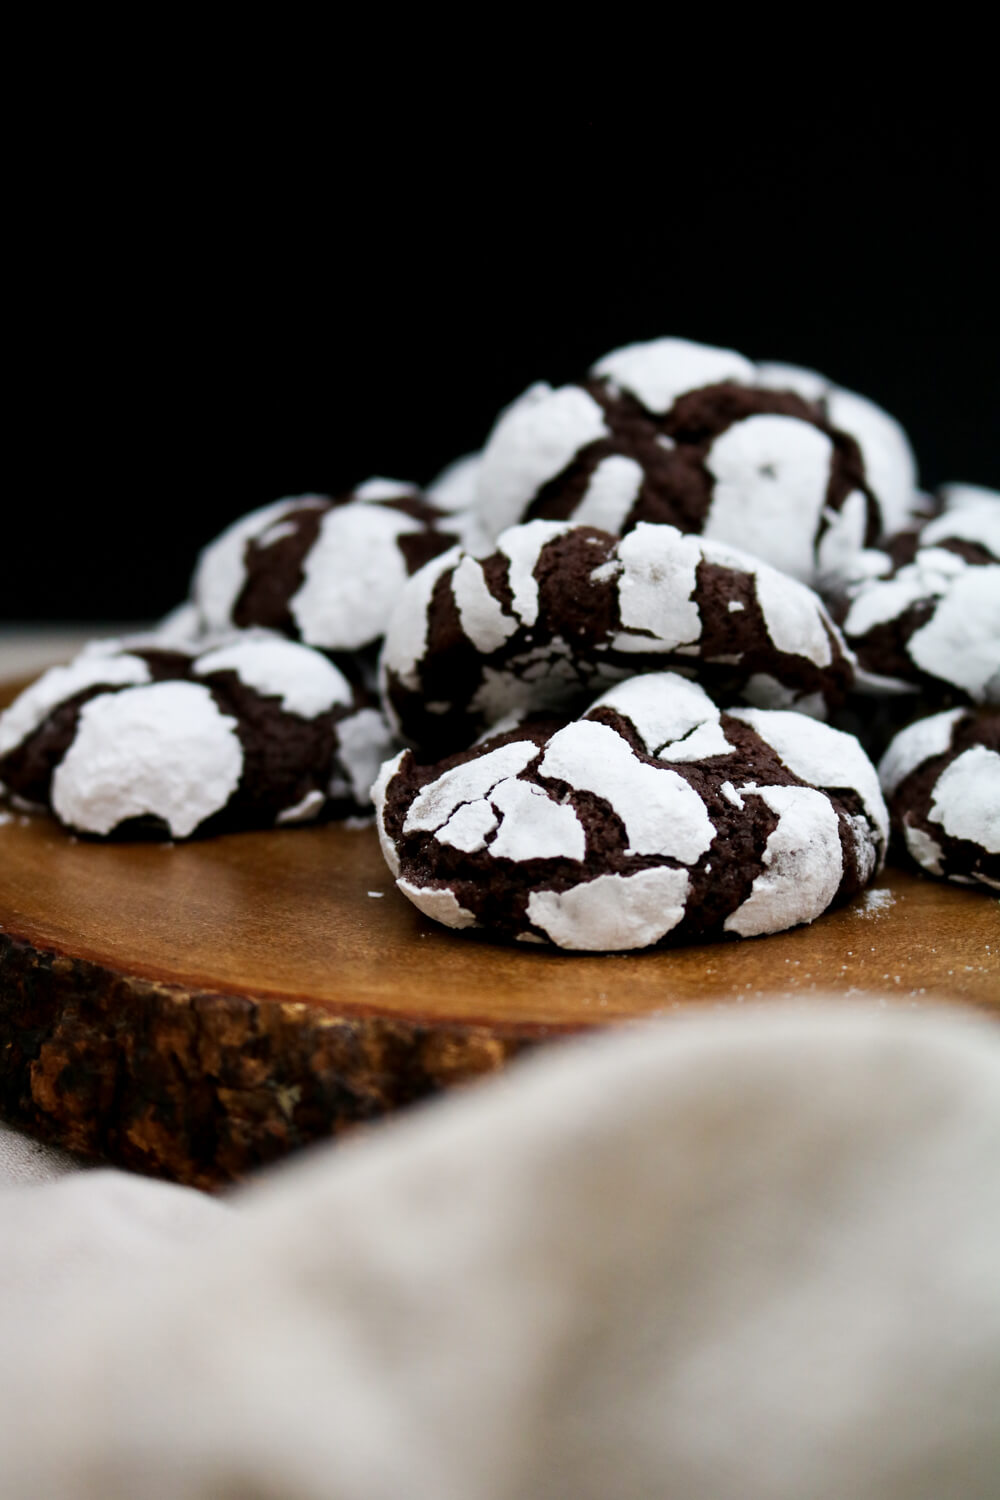 Chocolate Crinkle Cookies | Take Some Whisks